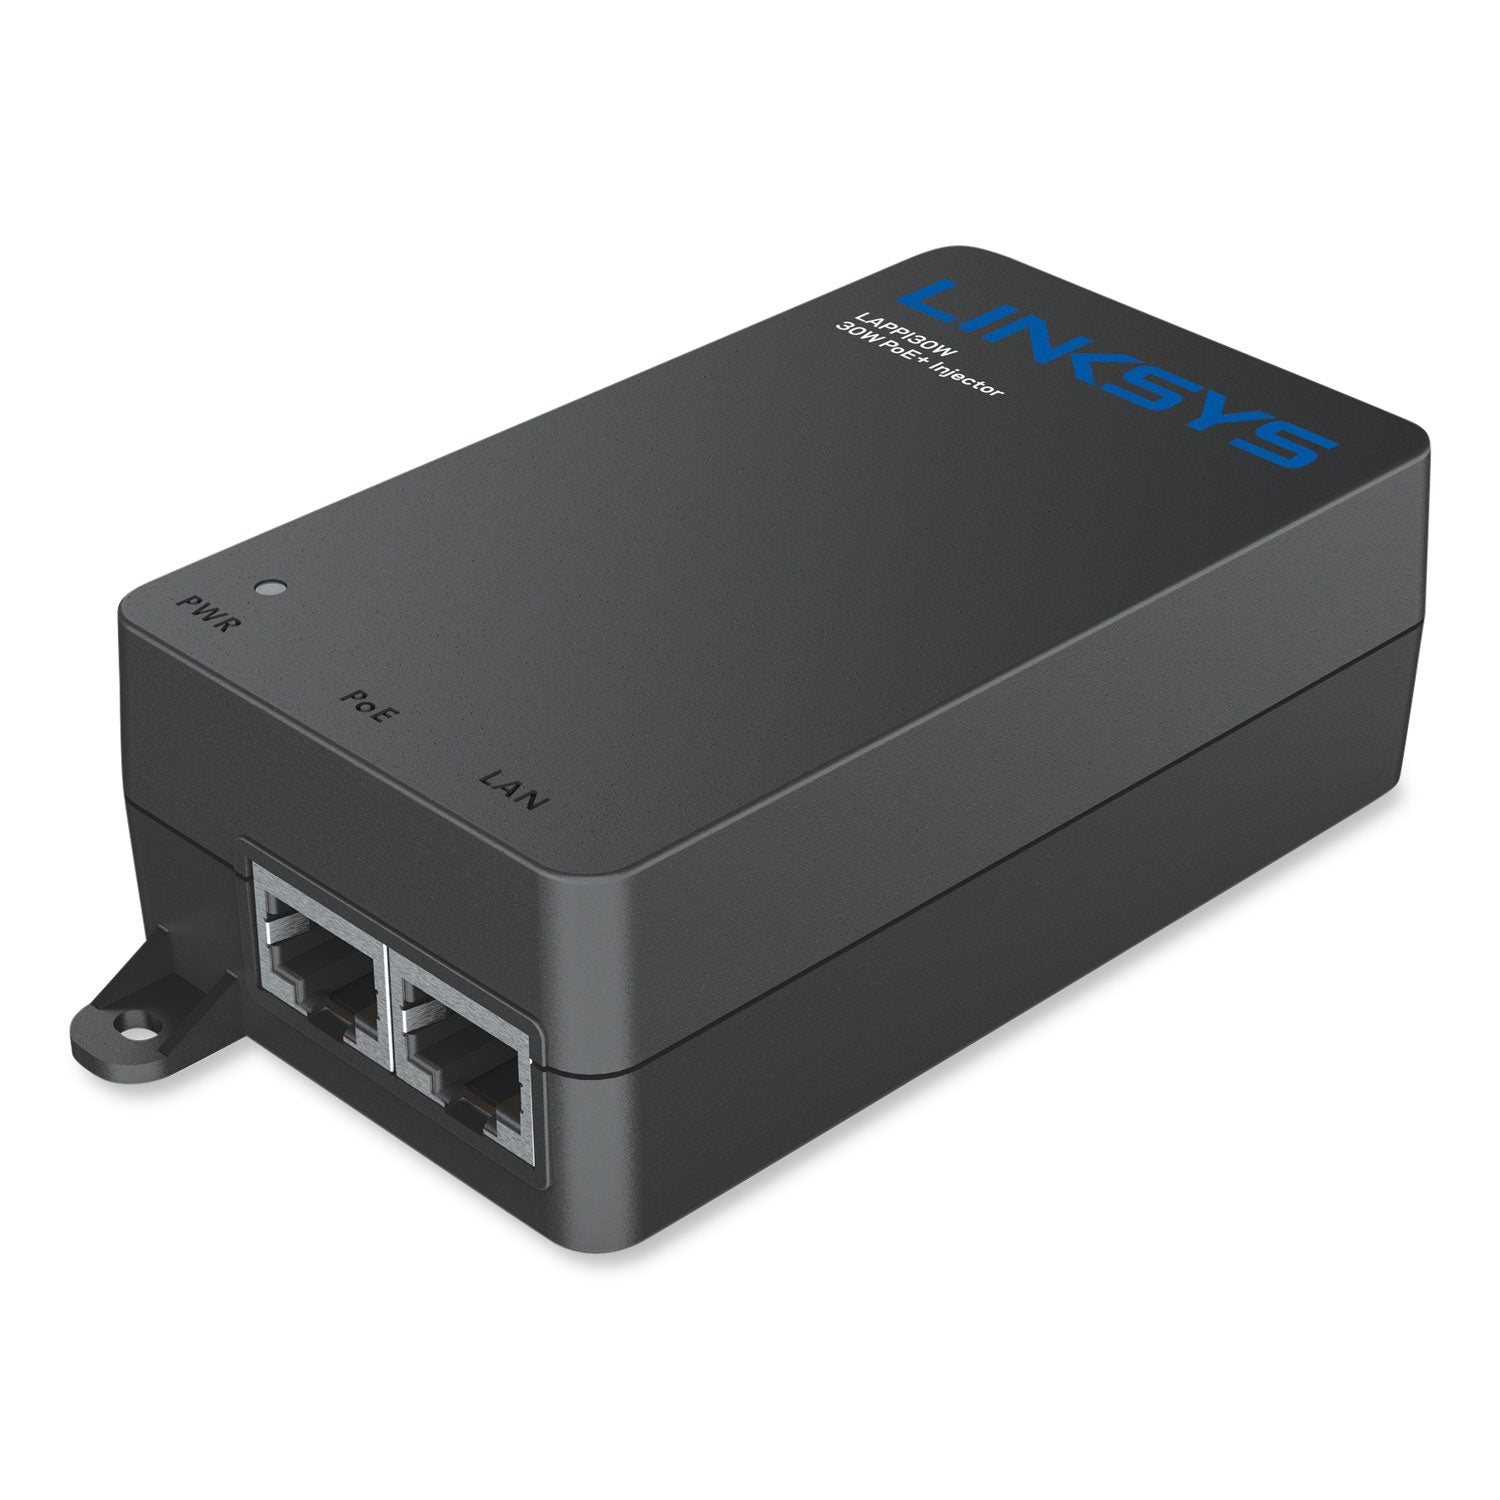 30w-8023at-gigabit-poe+-injector-2-ports-taa-compliant_lnklappi30w - 1